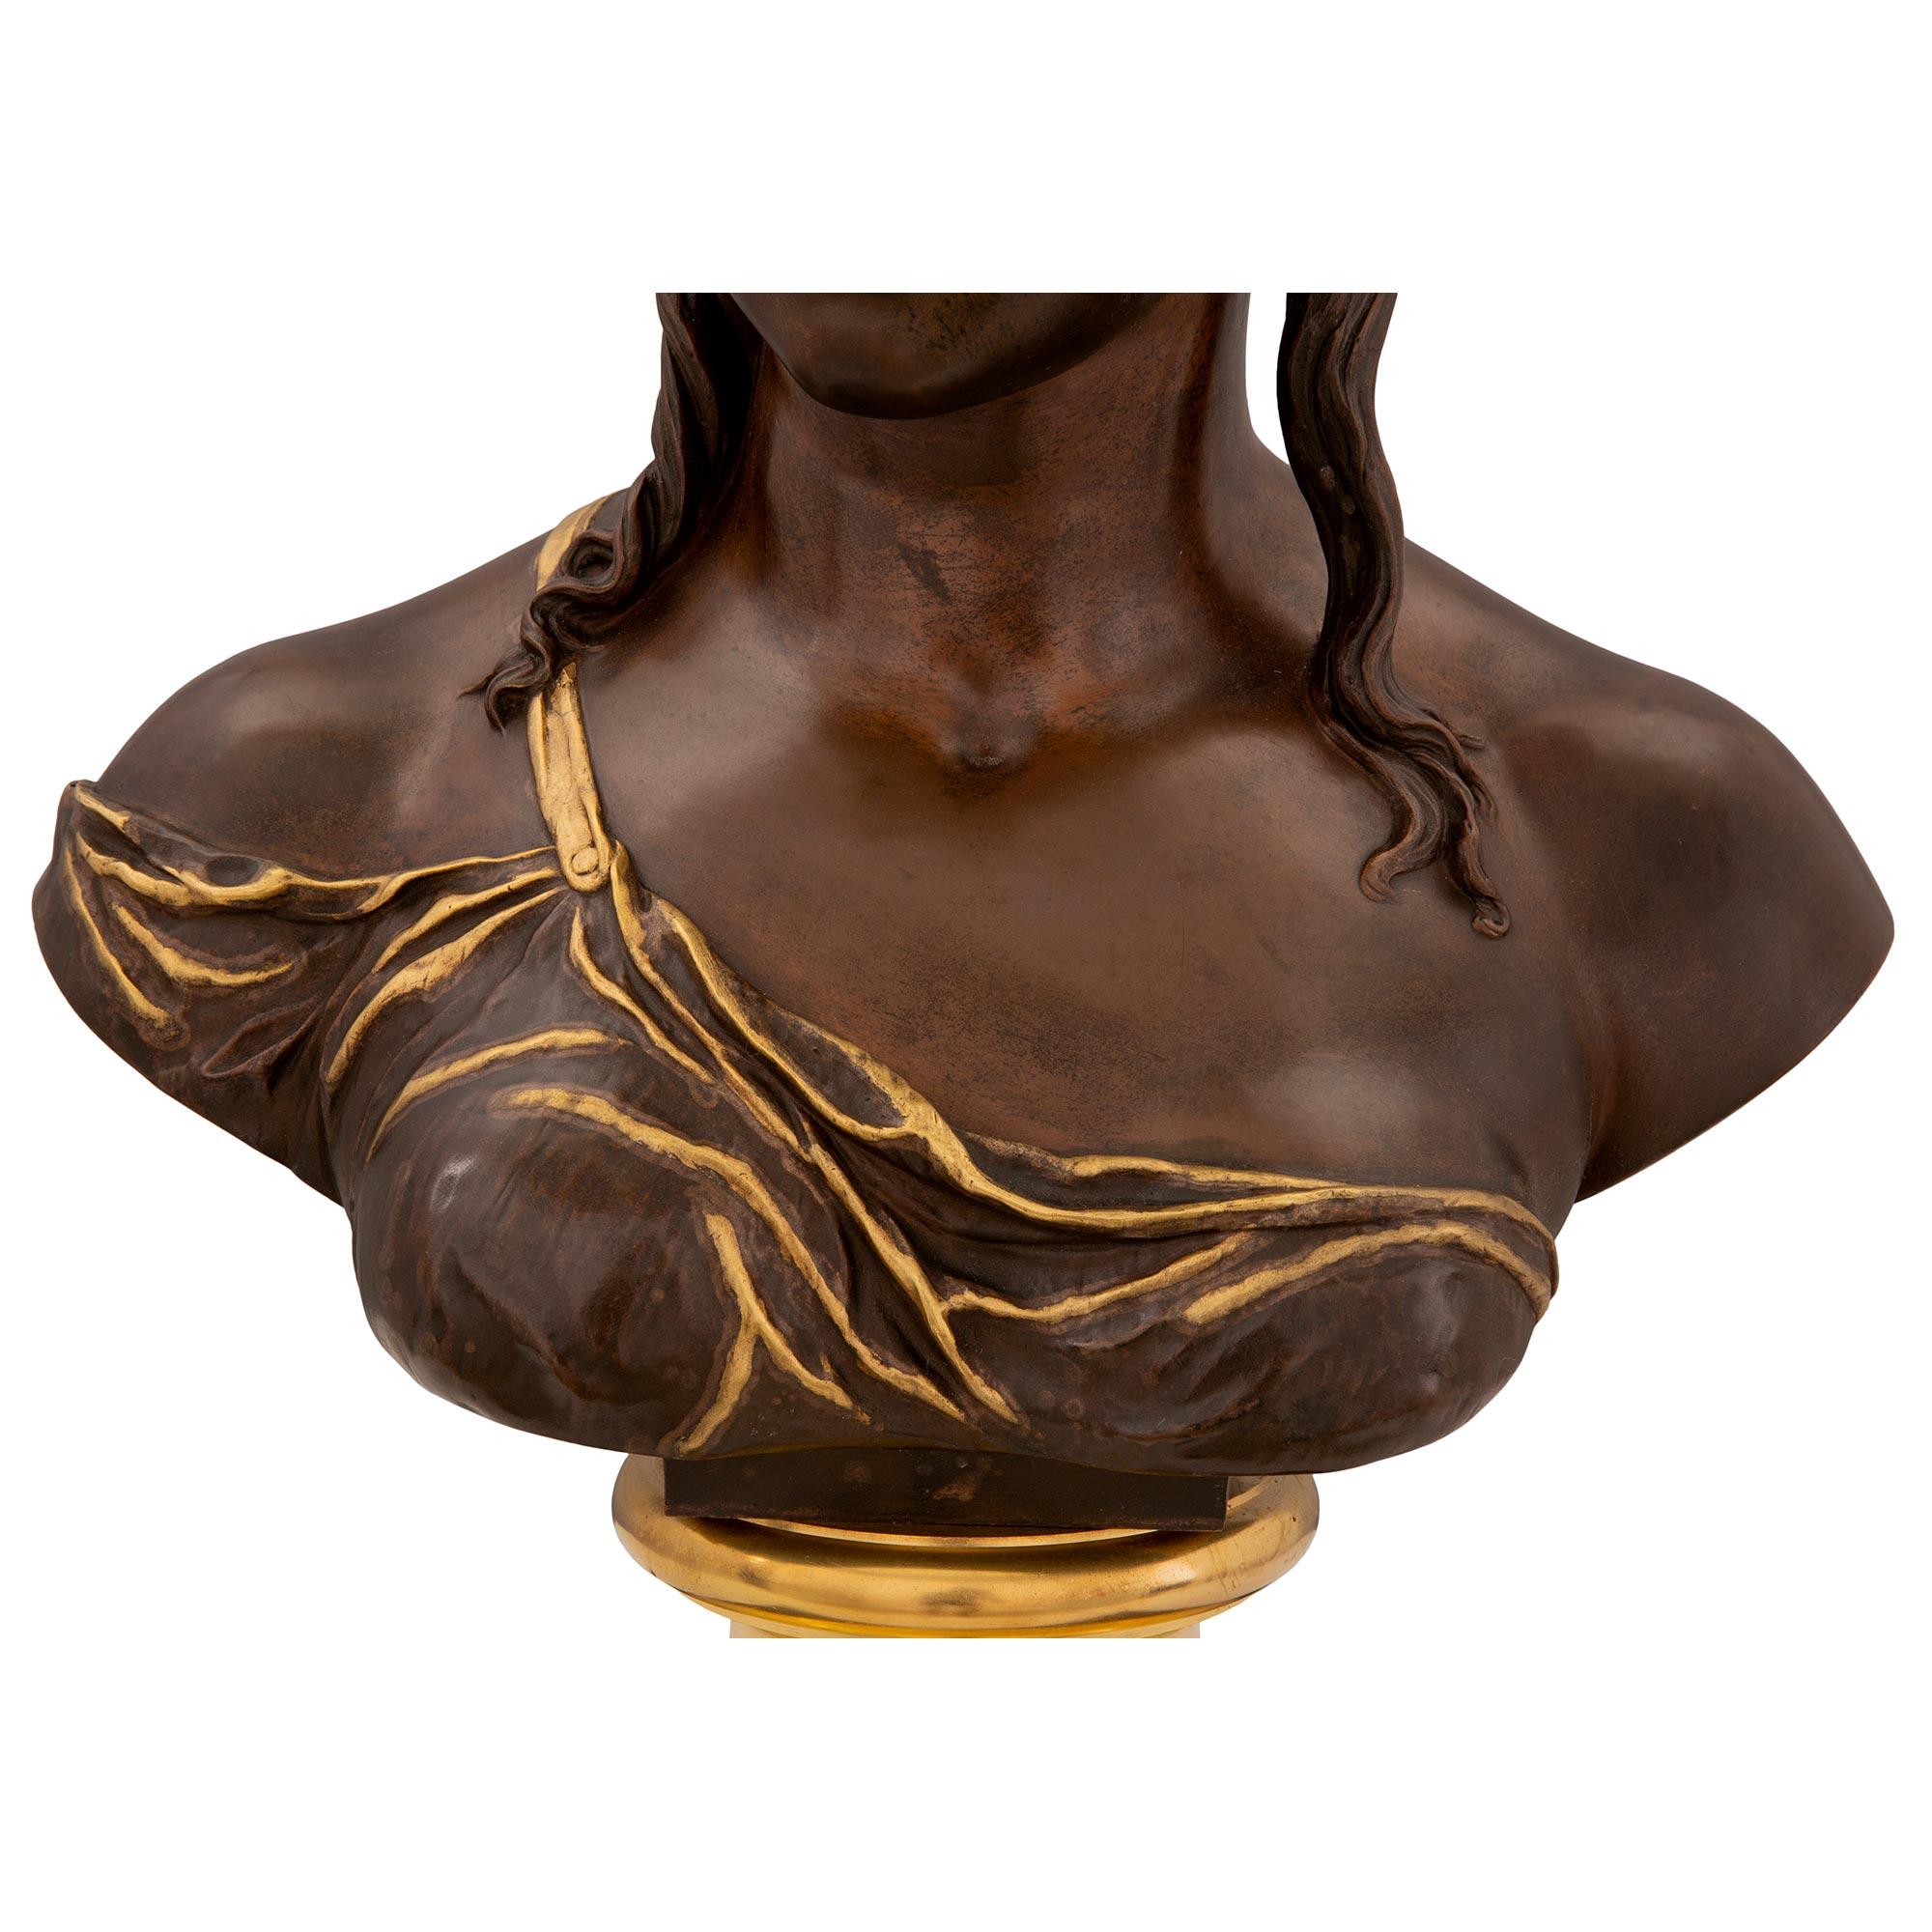 French 19th Century Louis XVI Style Bronze and Ormolu Bust, Signed H. Dumaice For Sale 2